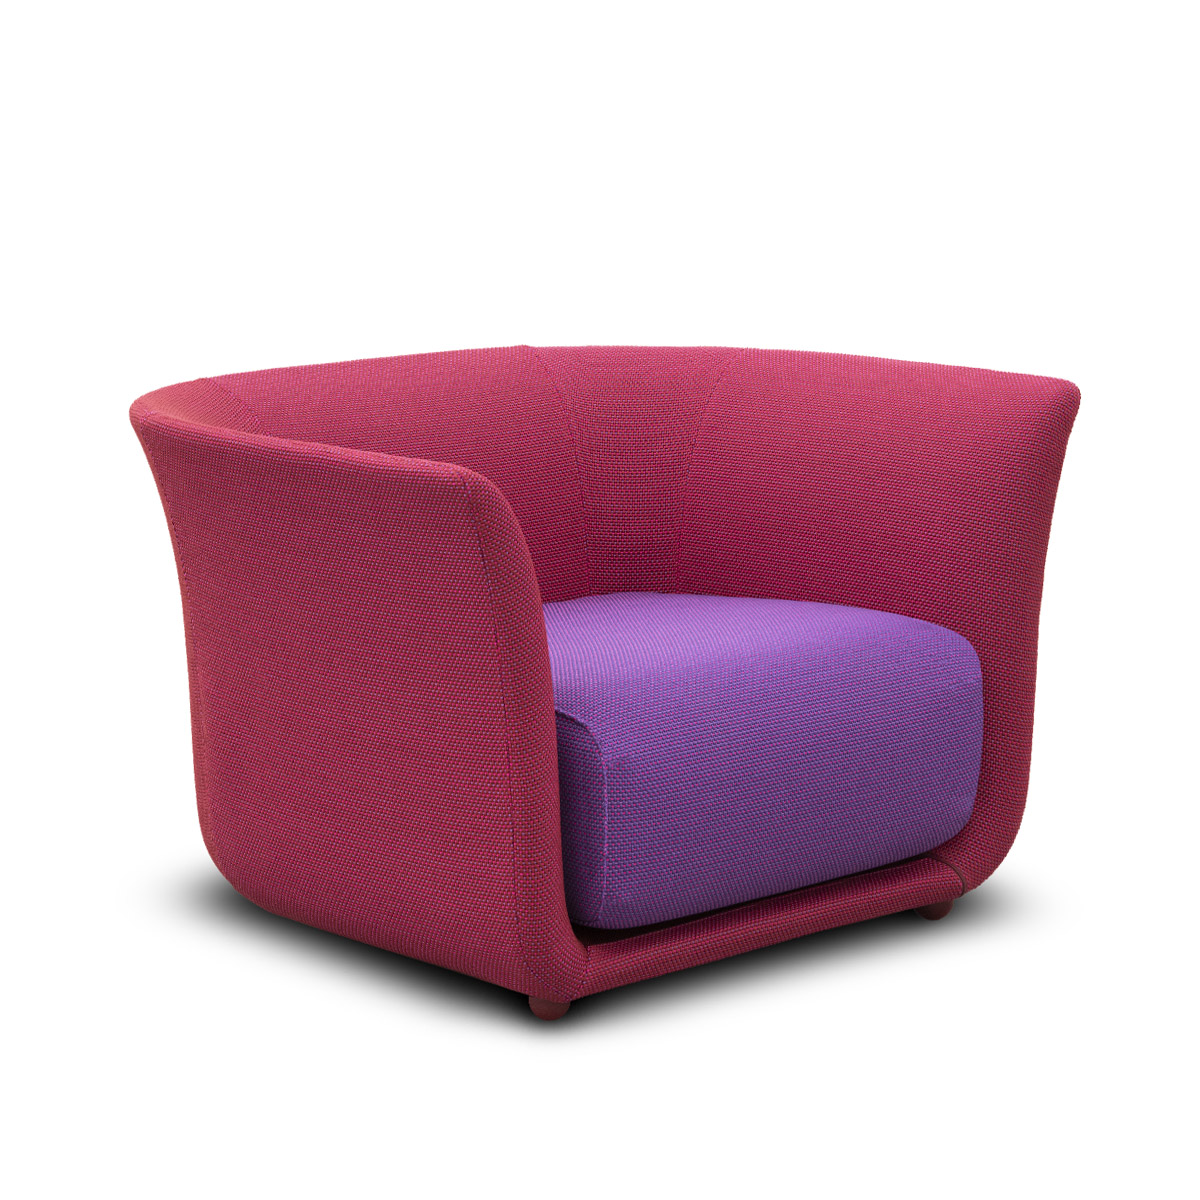 Marcel Wanders - Getting comfortable on our Lounge Chair for